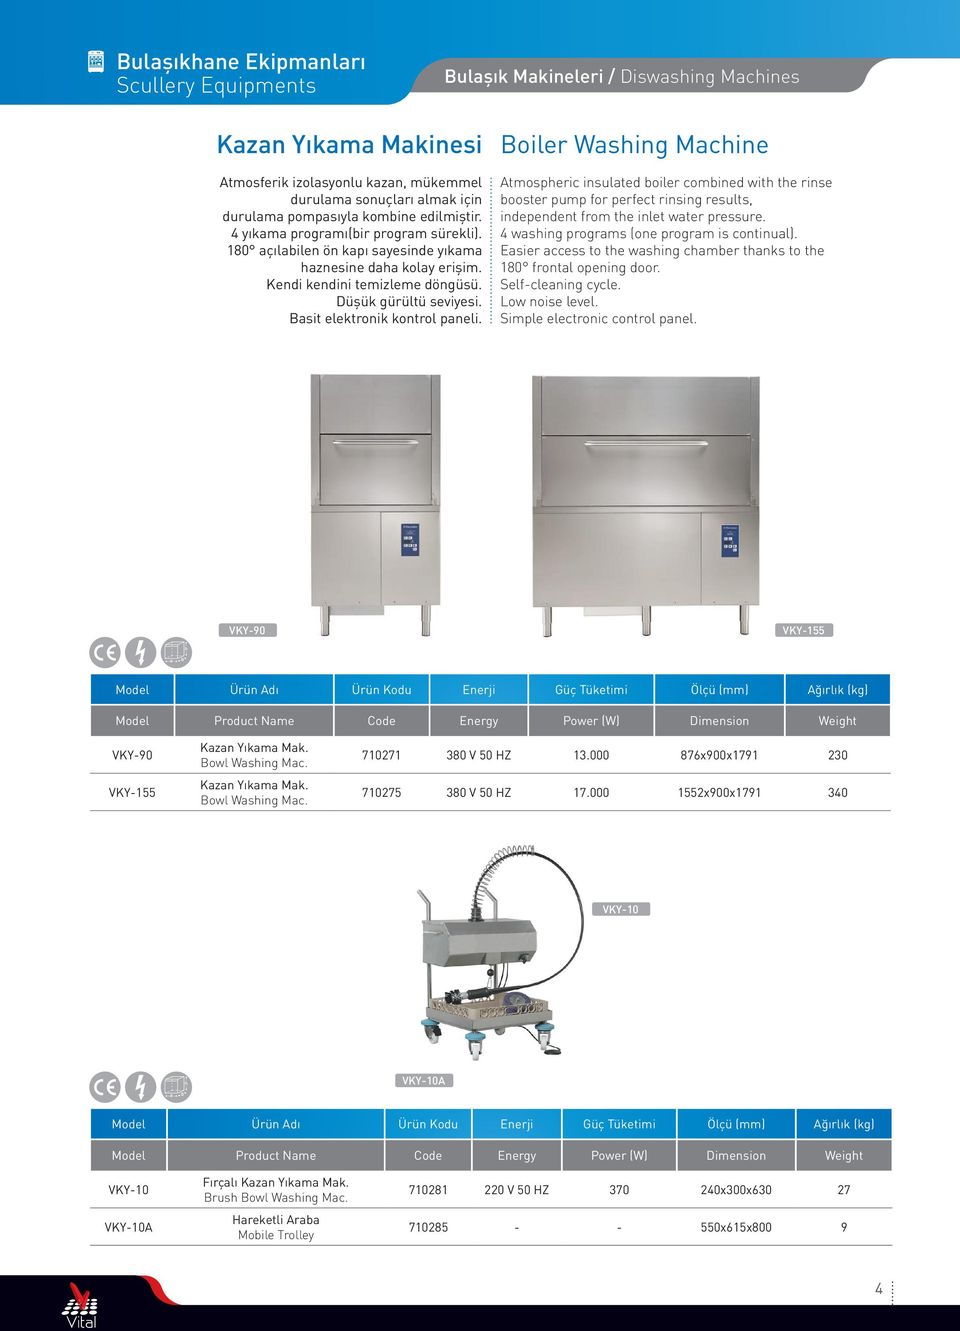 Basit elektronik kontrol paneli. Boiler Washing Machine Atmospheric insulated boiler combined with the rinse booster pump for perfect rinsing results, independent from the inlet water pressure.